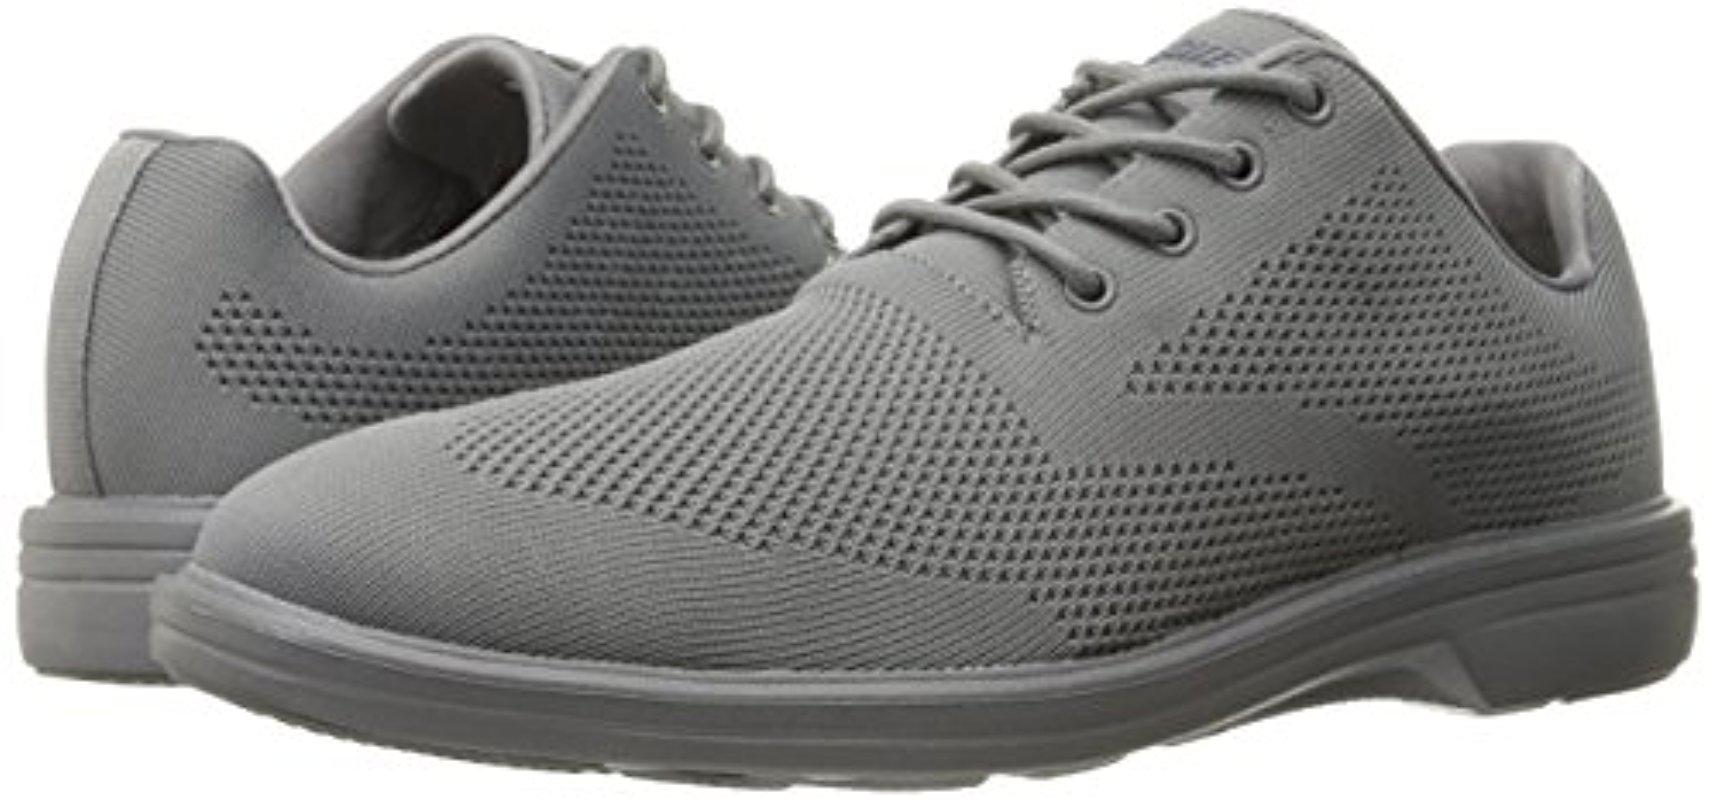 skechers walson mens oxford shoes